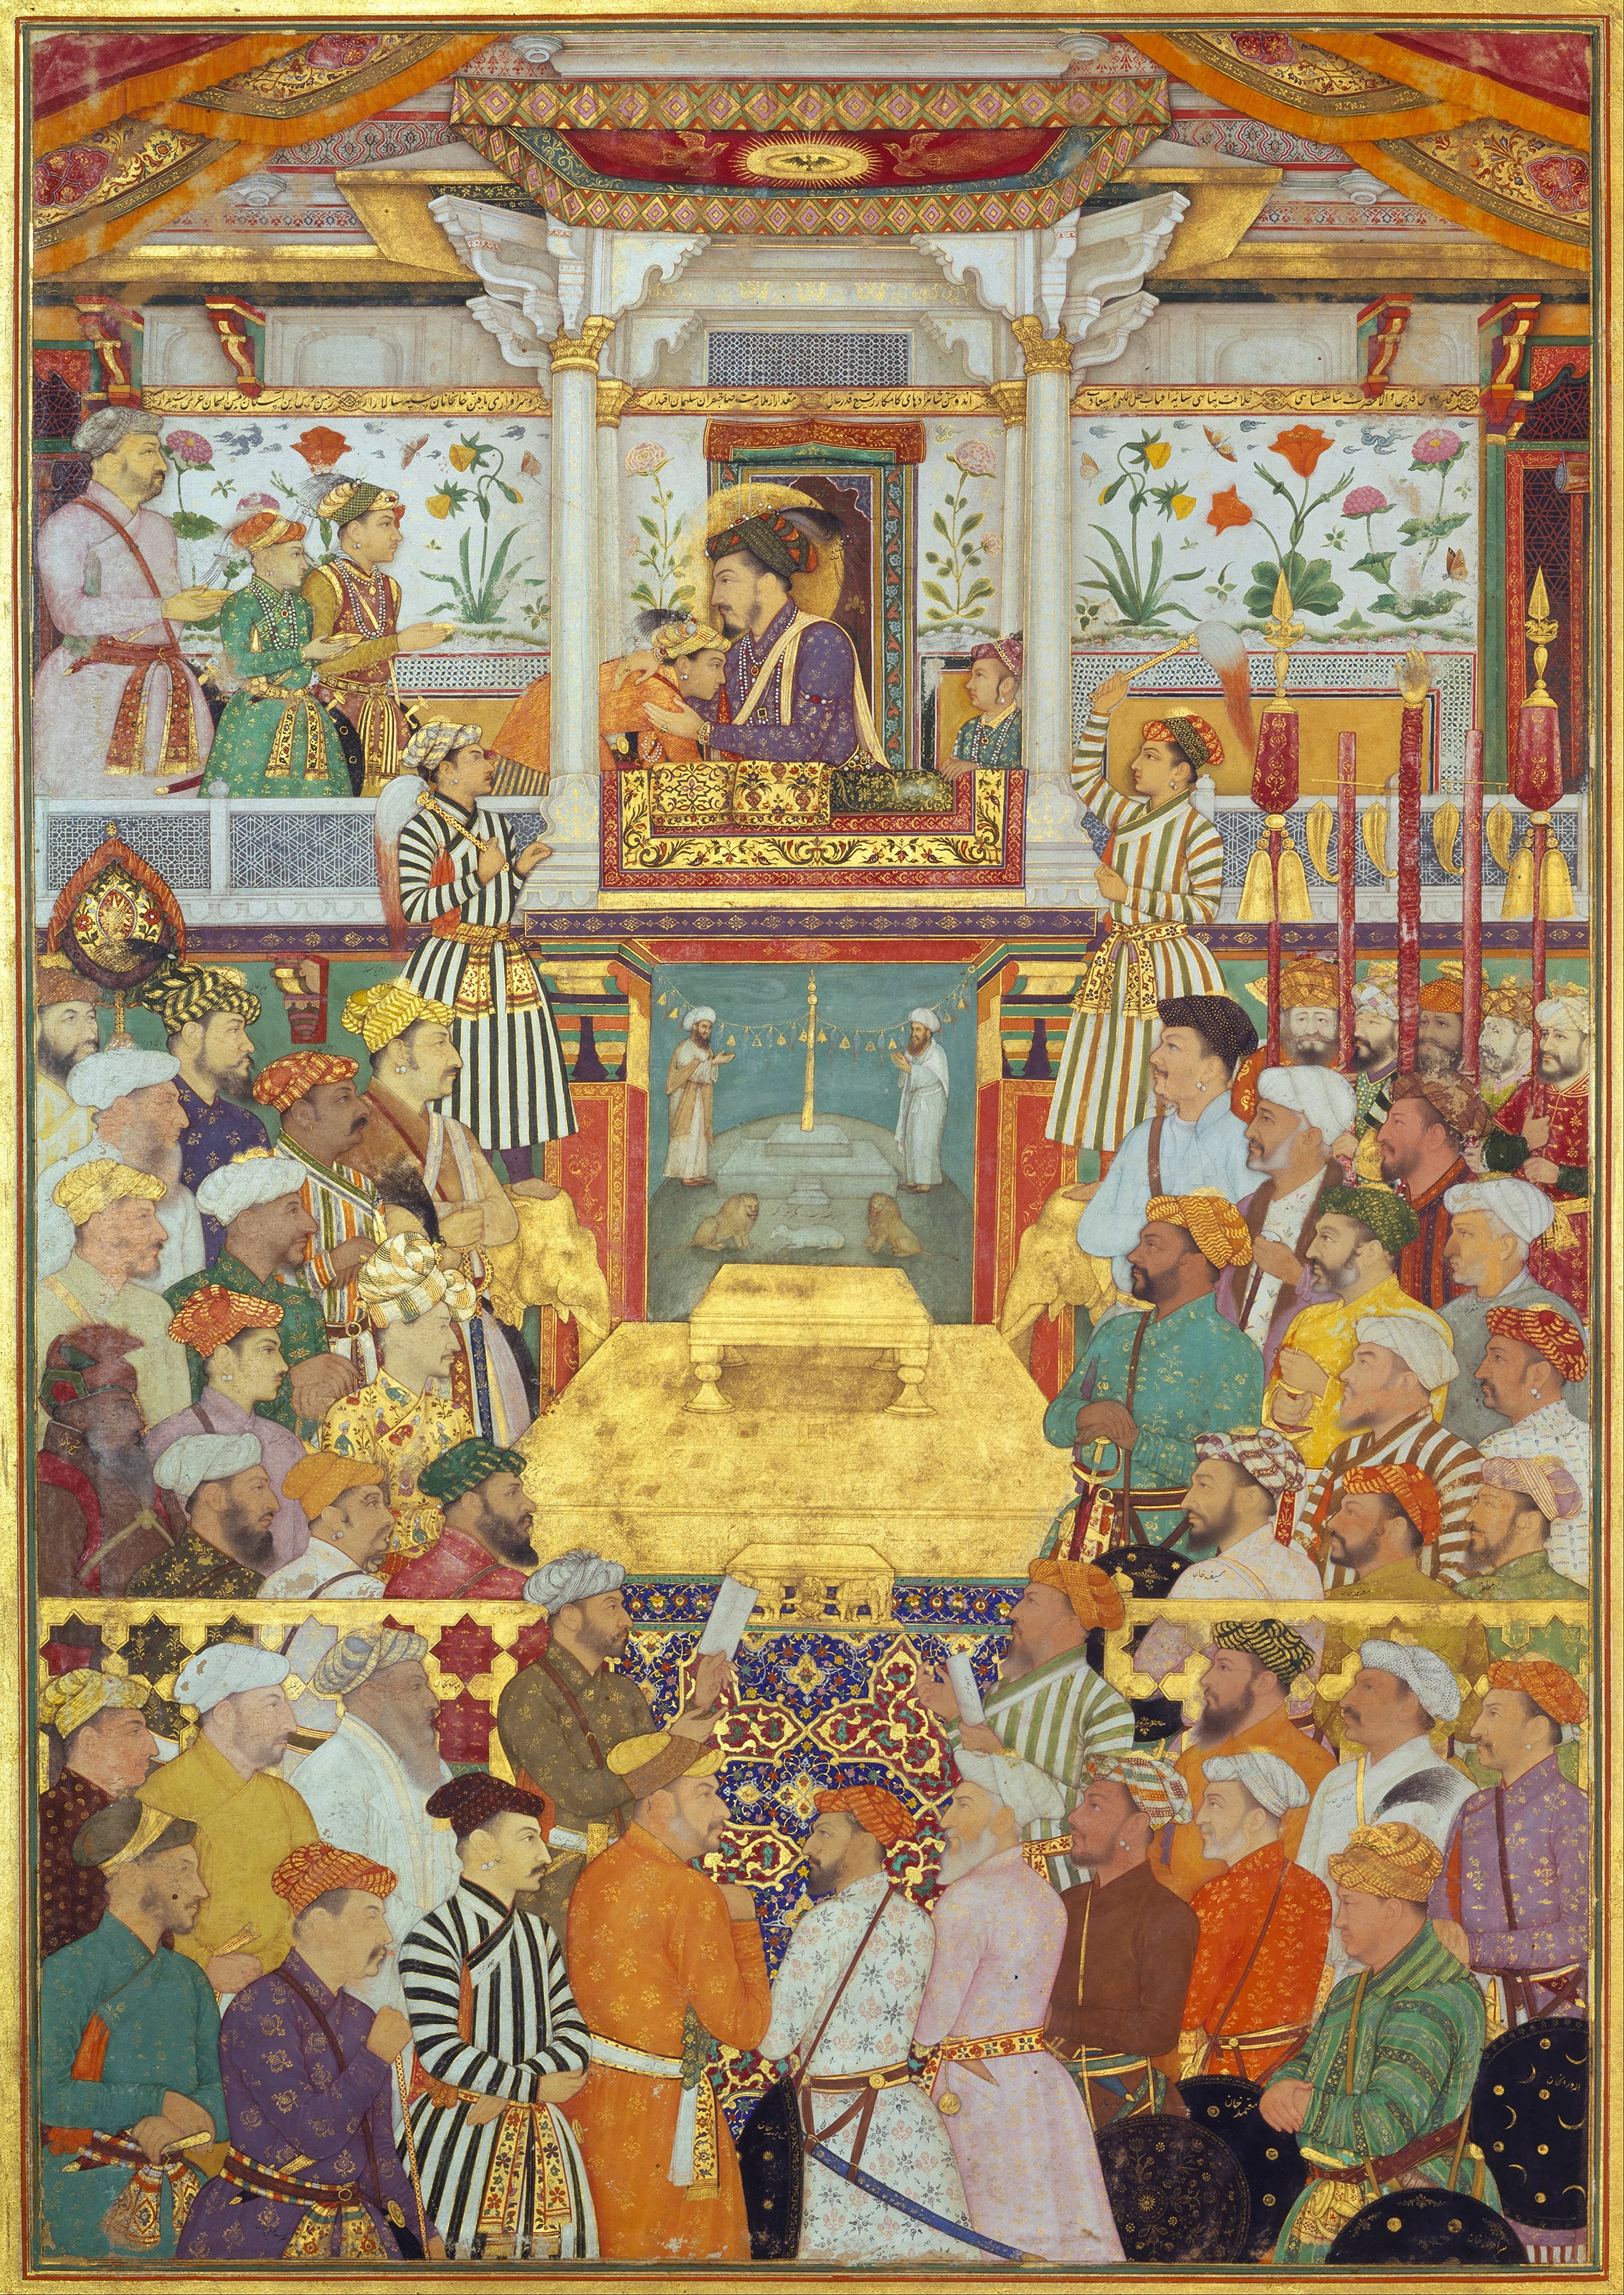 Shah-Jahan receives his three eldest sons and Asaf Khan during his accession ceremonies, Bichitr